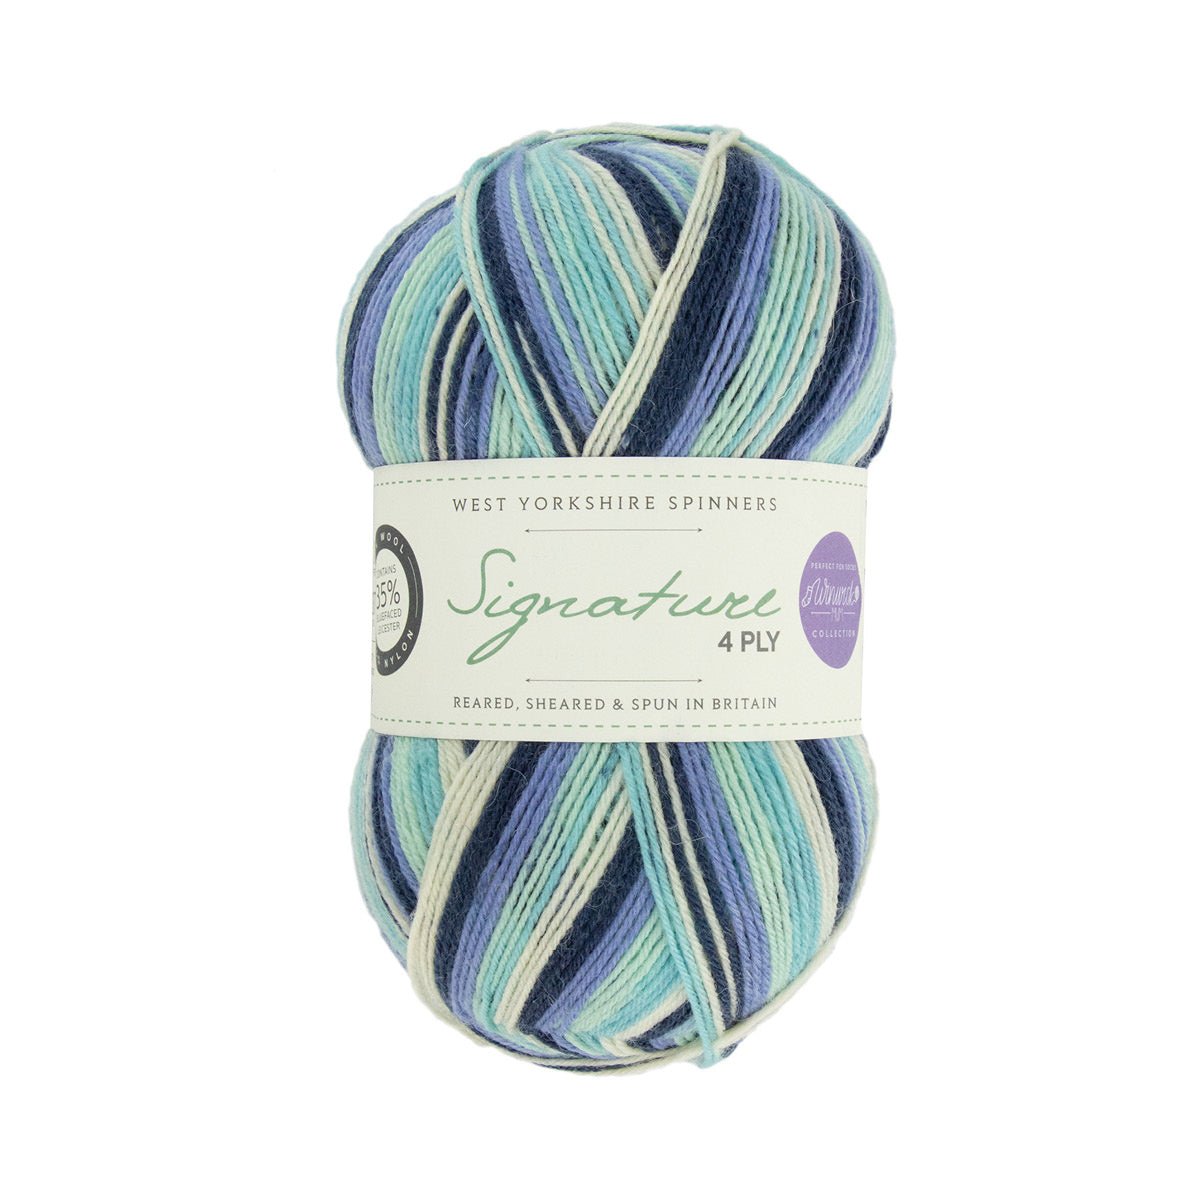 SIGNATURE 4PLY - Seasons by Winwick Mum 878-Winter Icicle - West Yorkshire Spinners